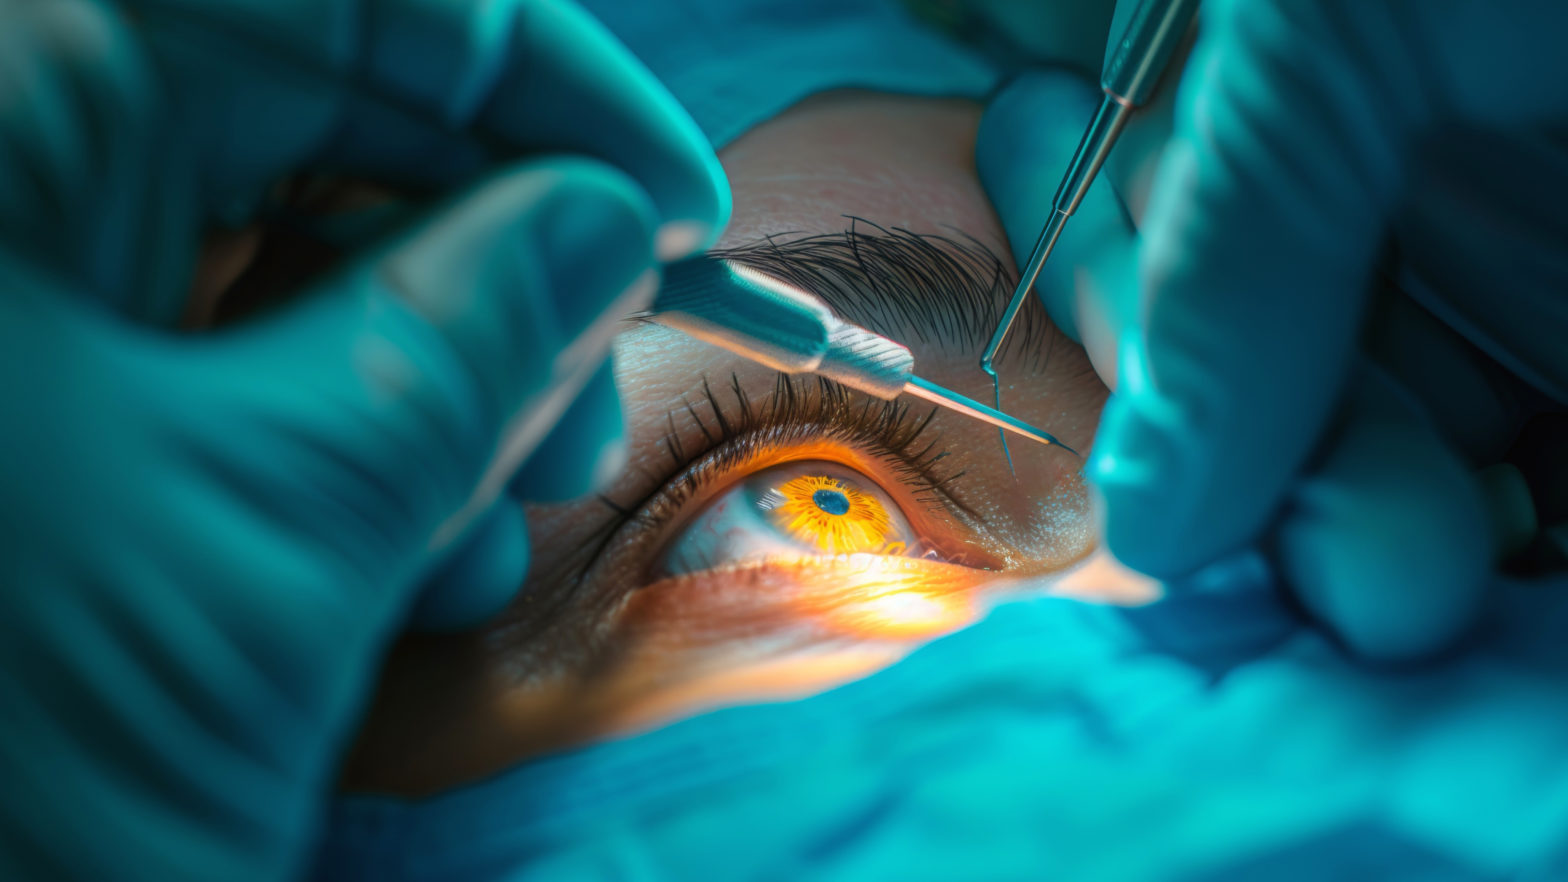 Putting a SMILE in Sports Person’s Eyes- Smile lasik surgery (Relex smile) makes it possible